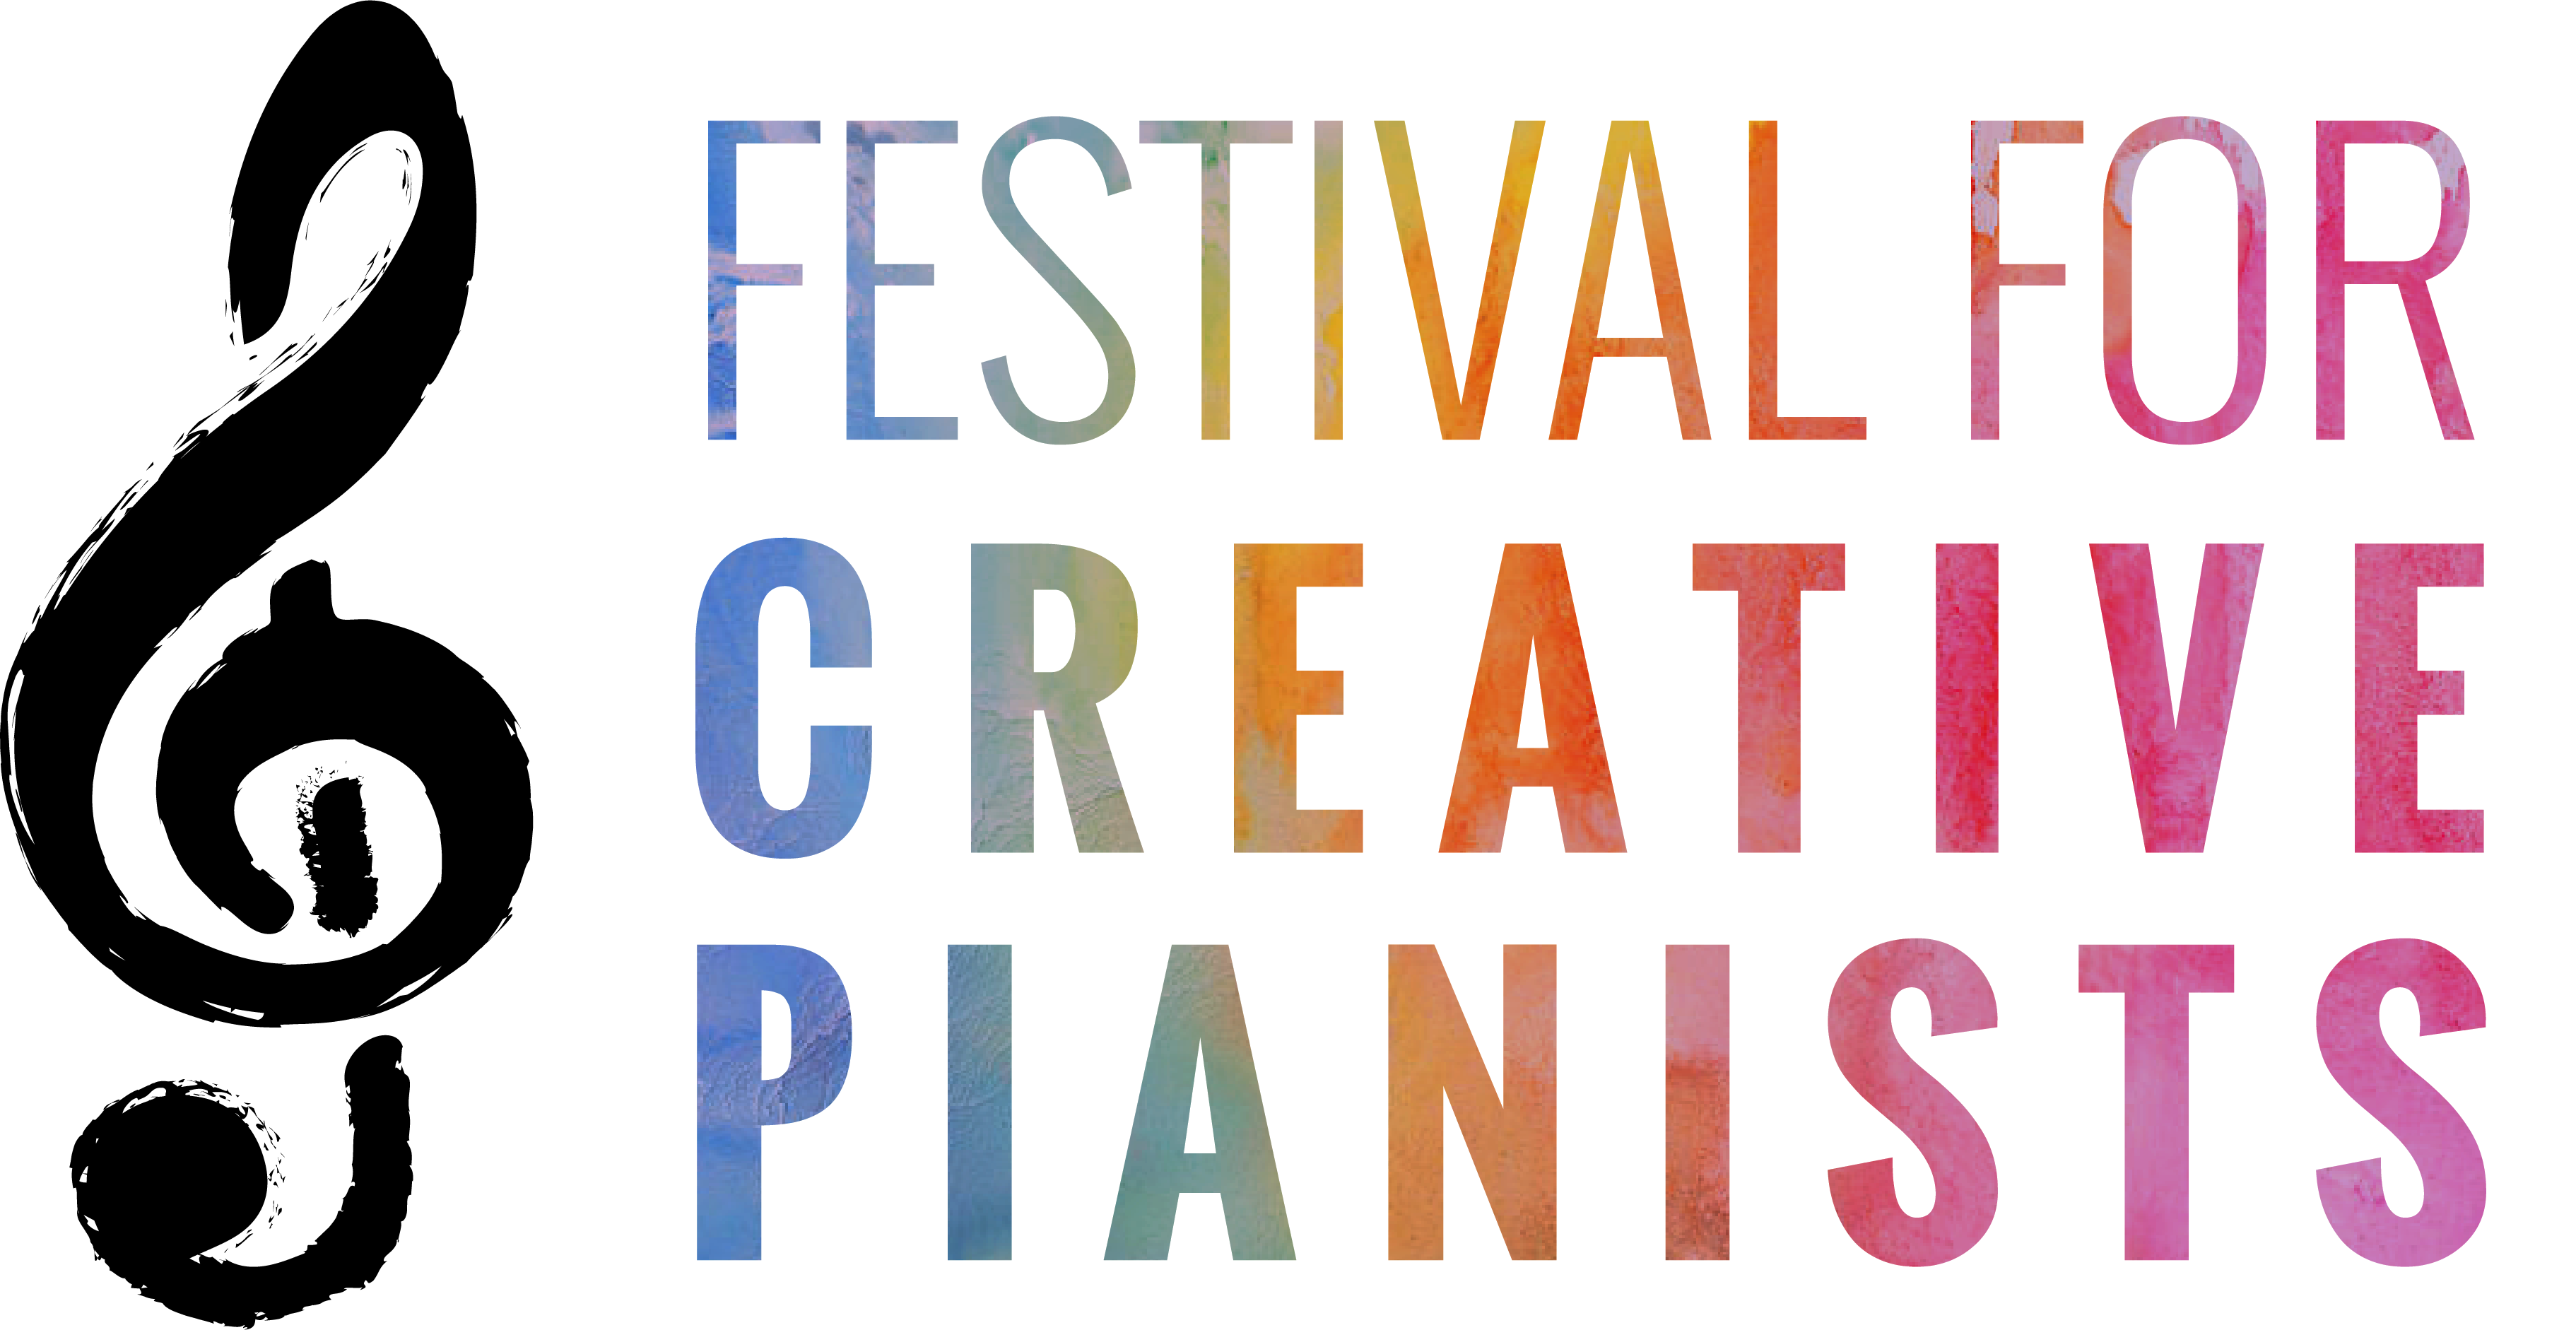 Festival for Creative Pianists logo